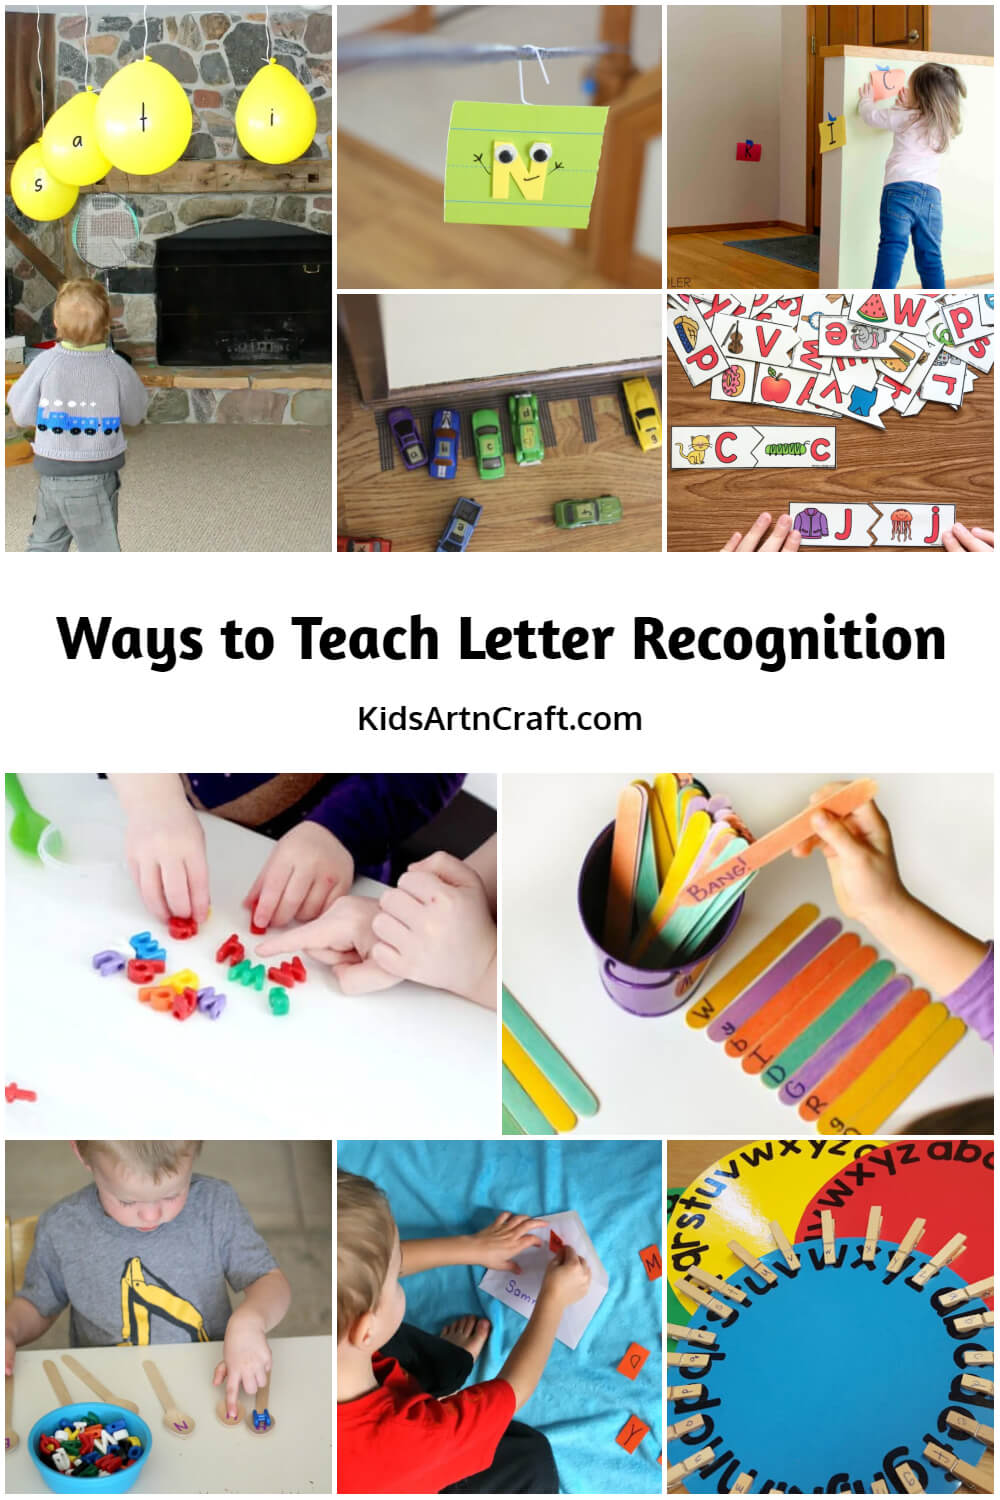  Ways to Teach Letter Recognition